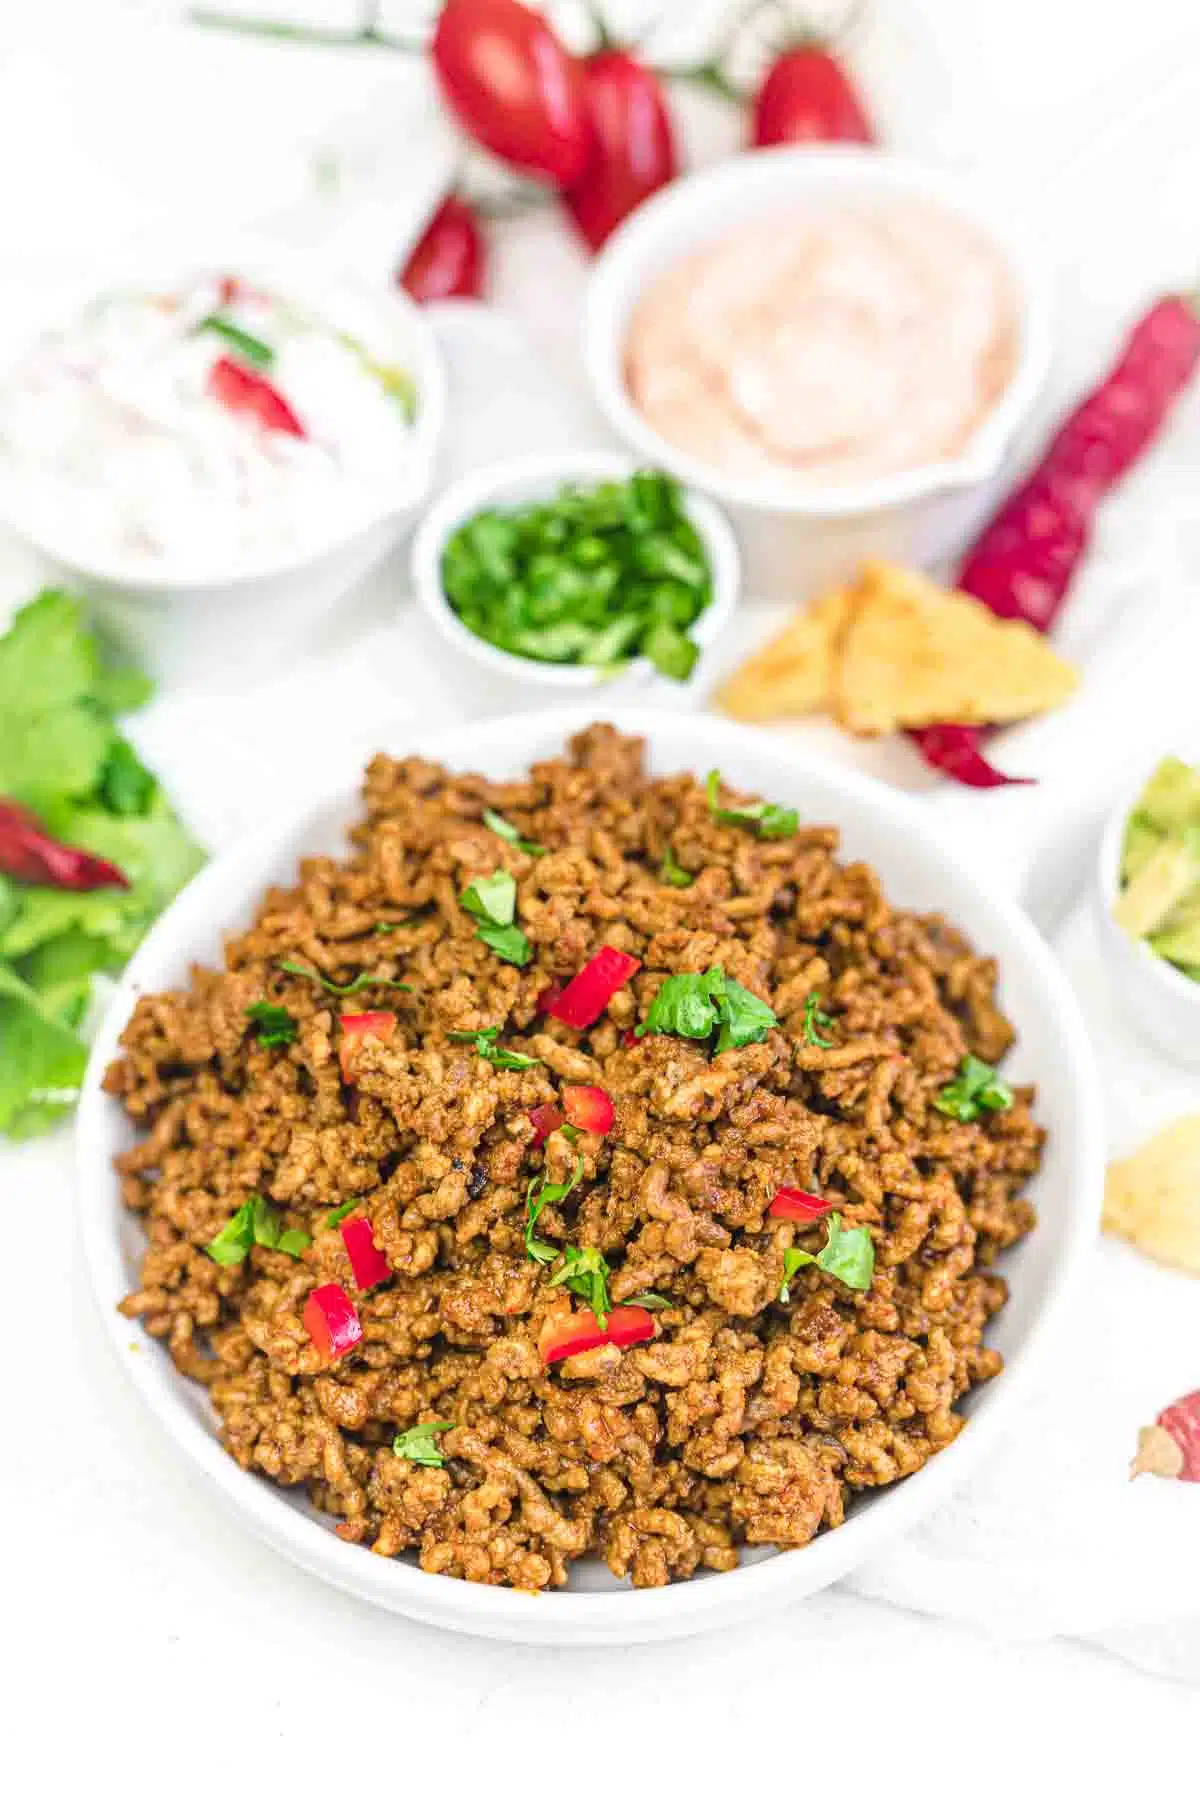 Best Homemade Ground Beef Taco Meat Recipe served in a white bowl